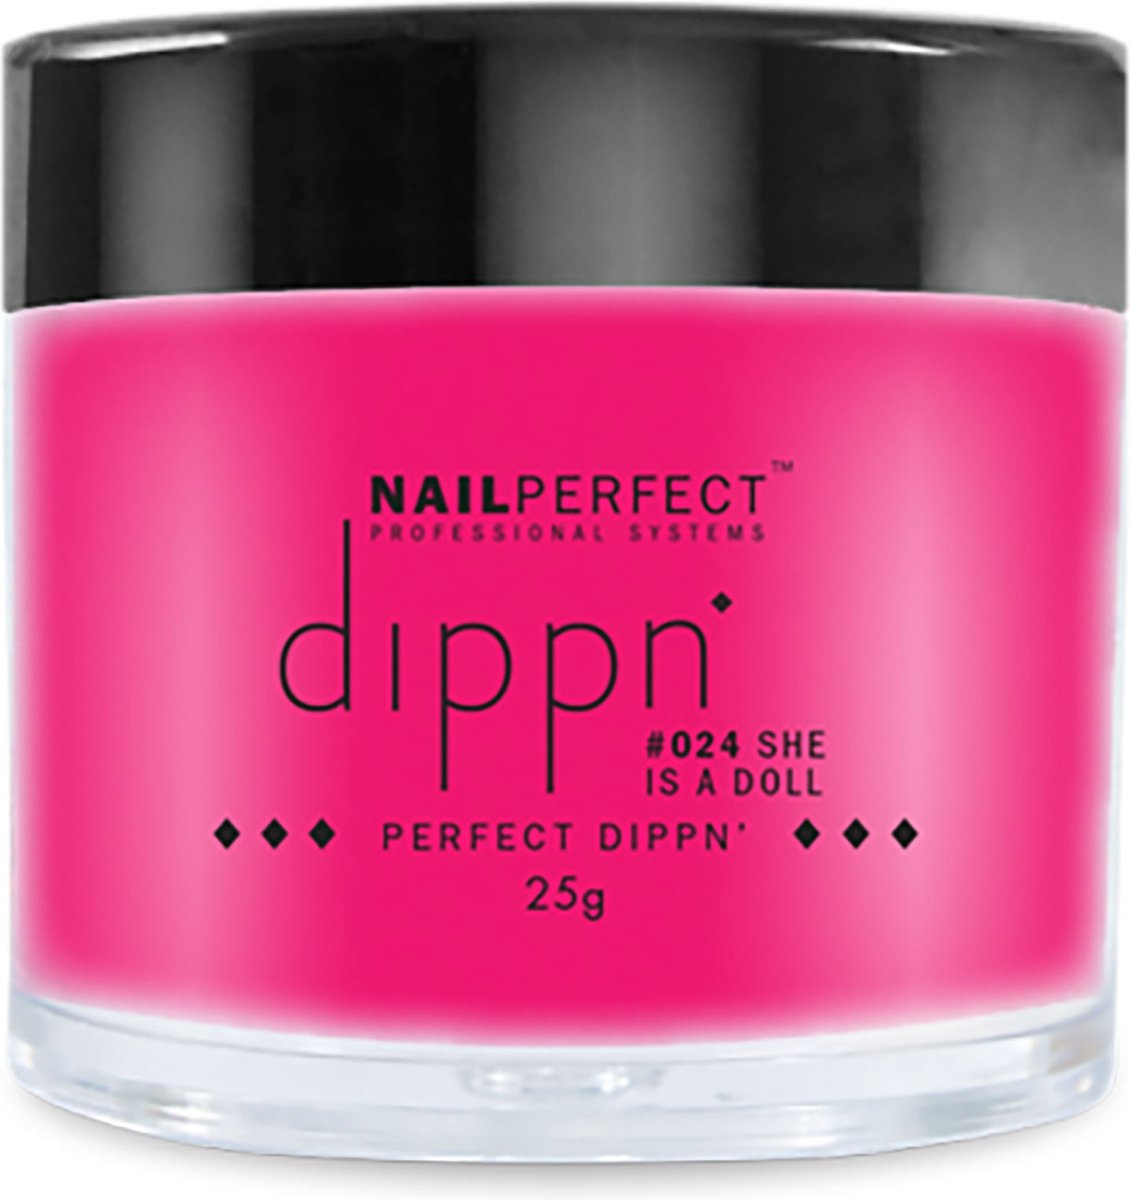 Nail Perfect - Dippn - #024 She Is A Doll - 25gr